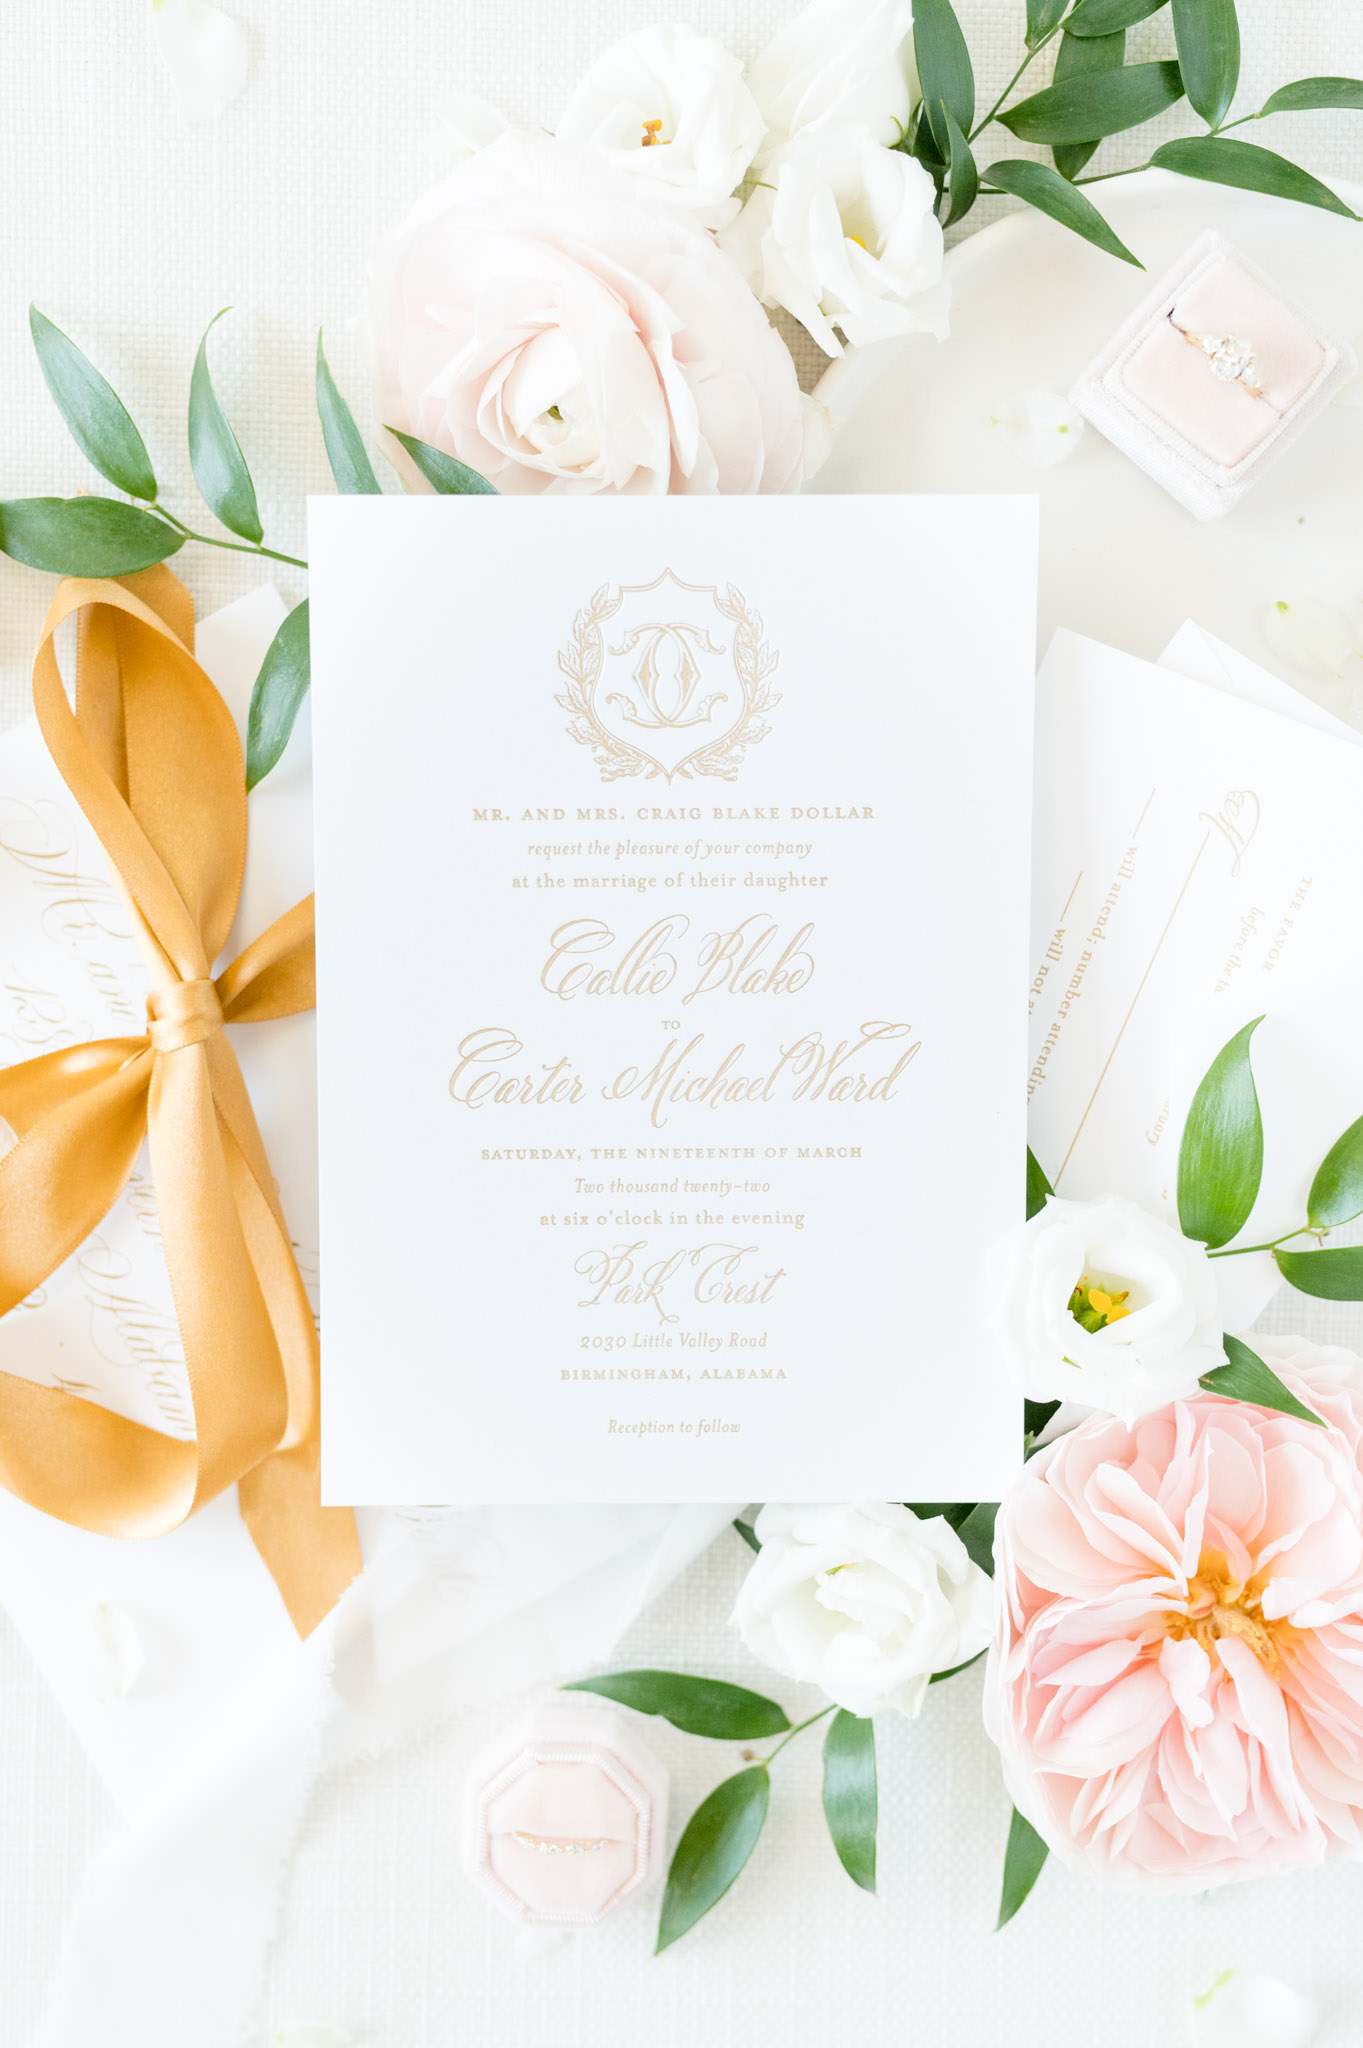 Wedding invitation sits with envelopes and flowers.